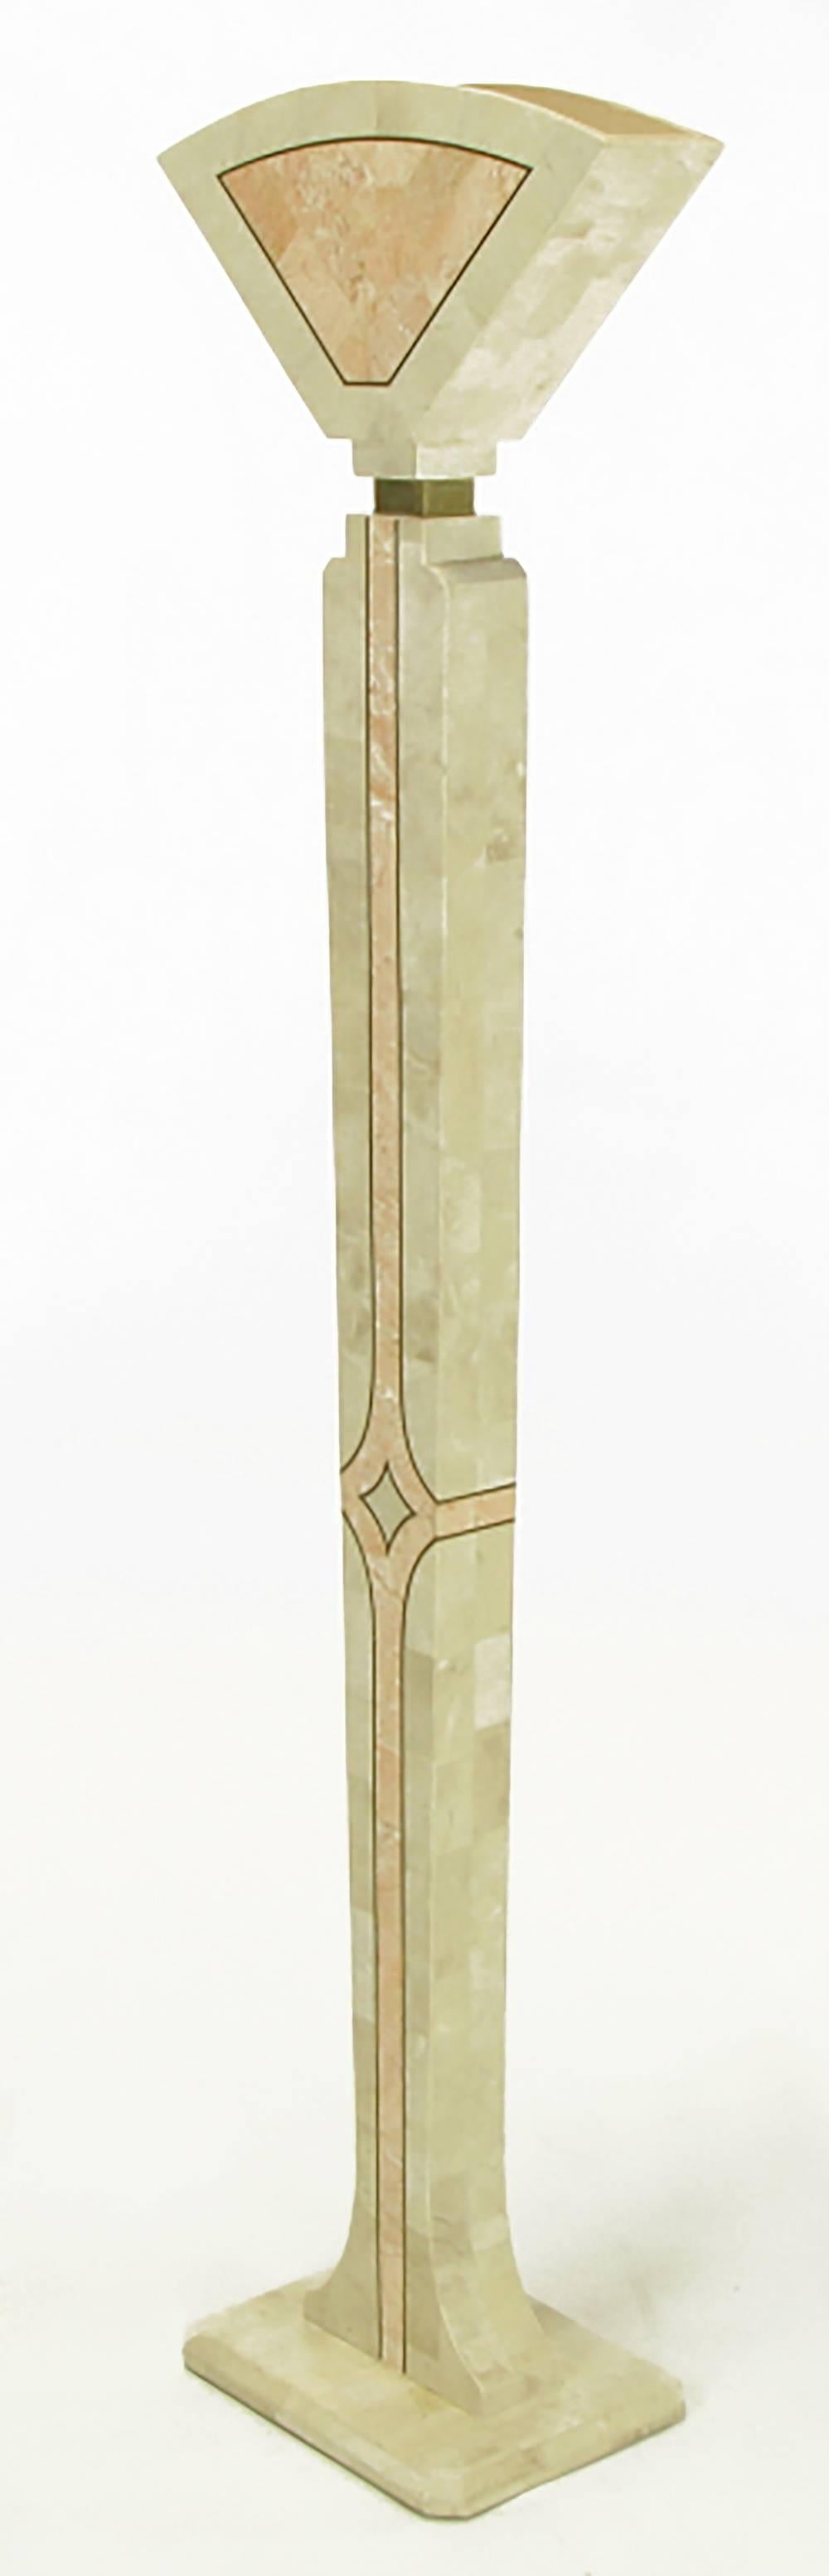 Impressive, tessellated fossil stone over wood Art Deco revival floor lamp from Robert Marcius for Casa Bique. Brass inlay demaking the fossil stone sections, square brass spacer between the base and the fan shaped shade. 

Manufactured in the